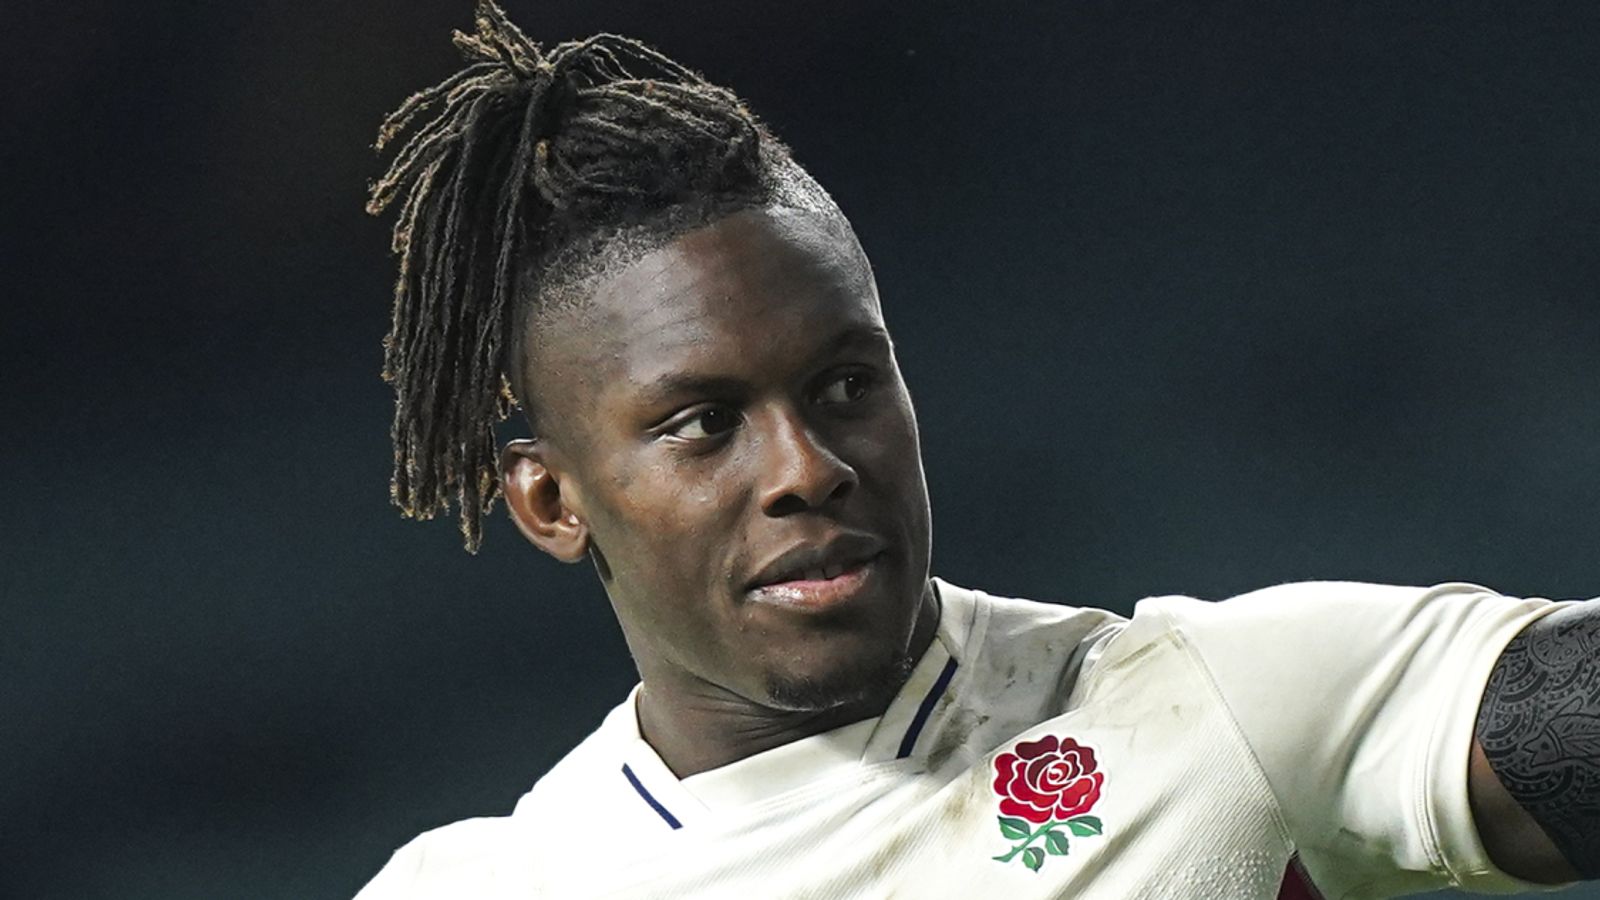 Maro Itoje believes Super Bowl-style entertainment could benefit rugby union | Rugby Union News